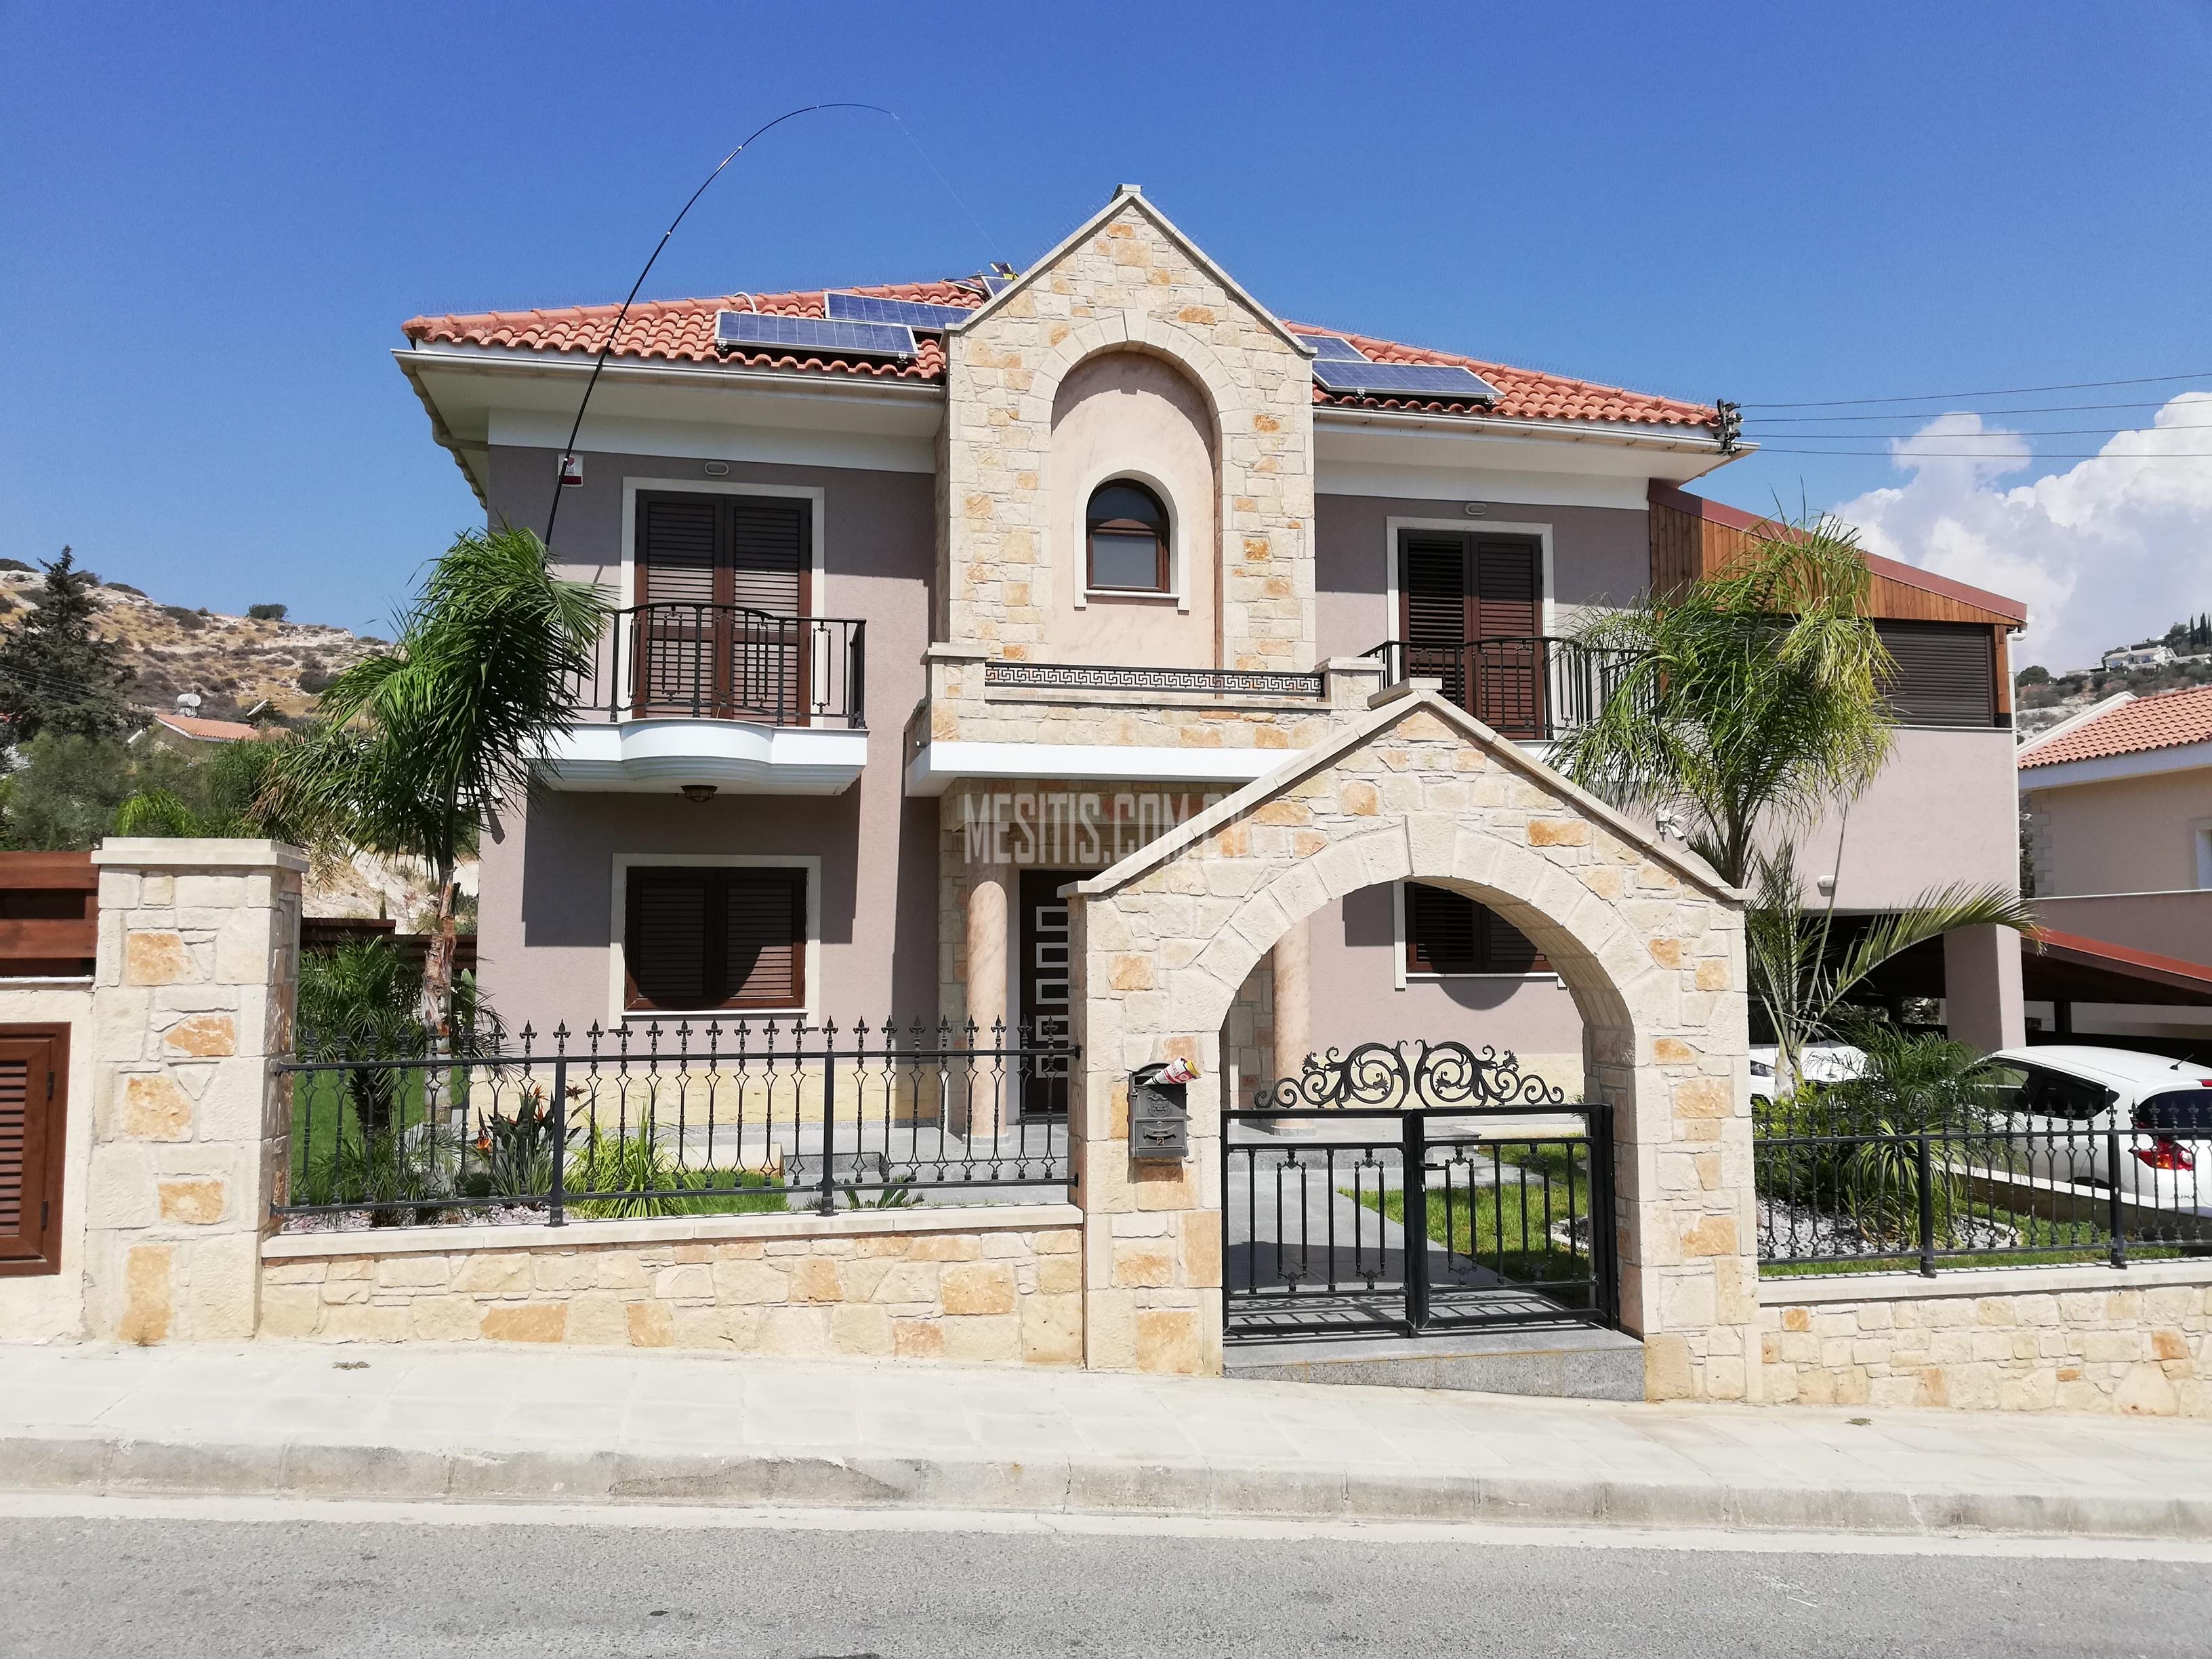 Detached House With Private Pool And Big Yard  For Sale Just Metres Away From Four Season Hotel #3115-1